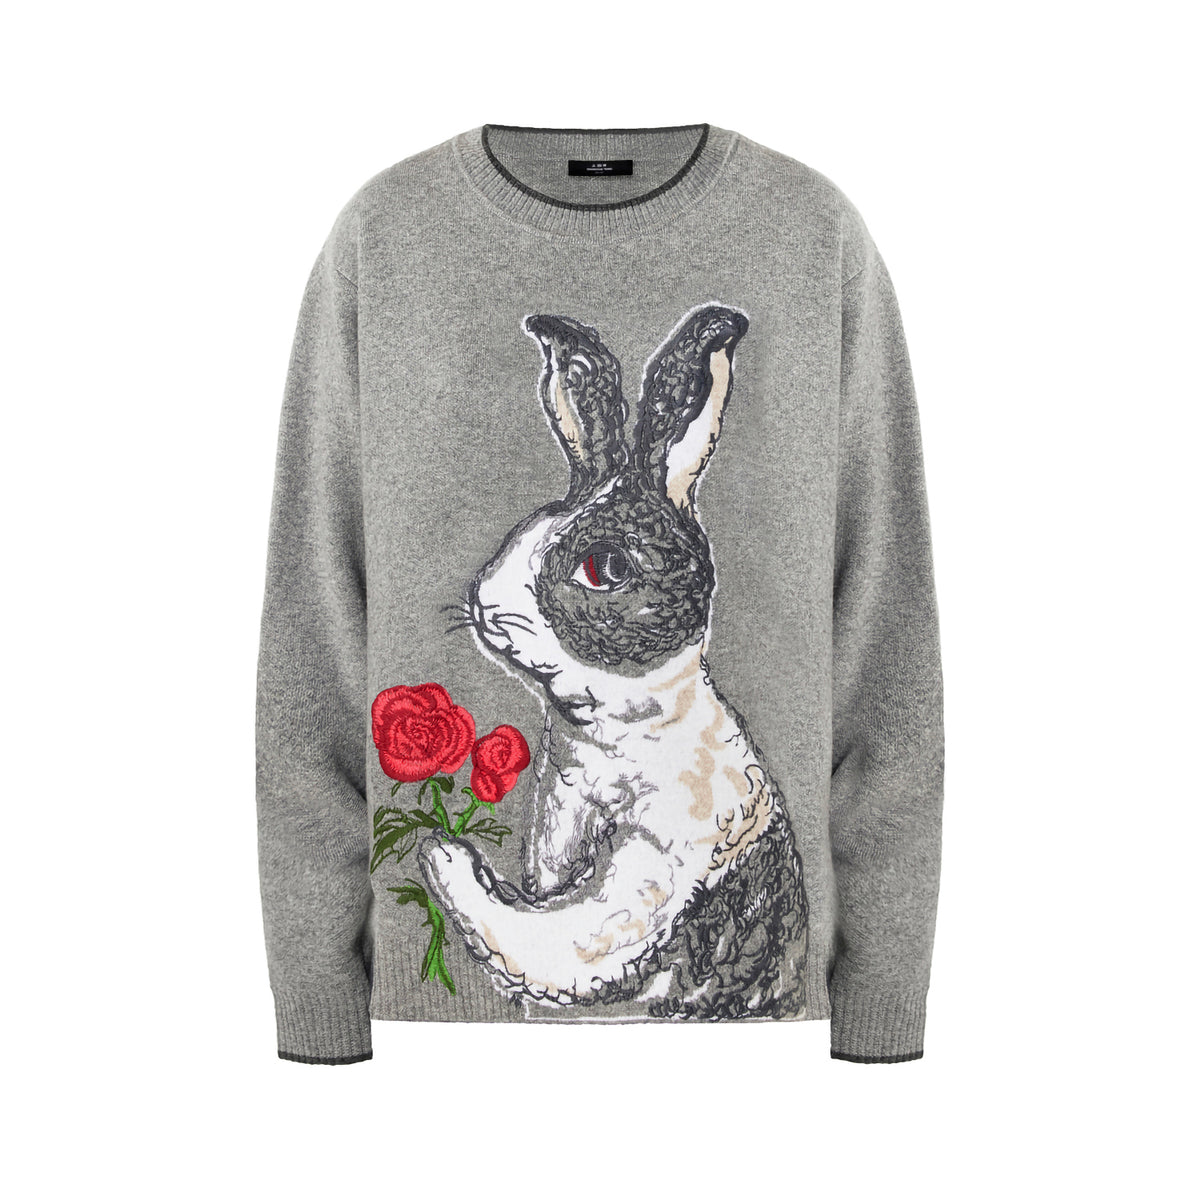 Jade Rabbit Embroidery Cashmere Sweater by Artist Long Di